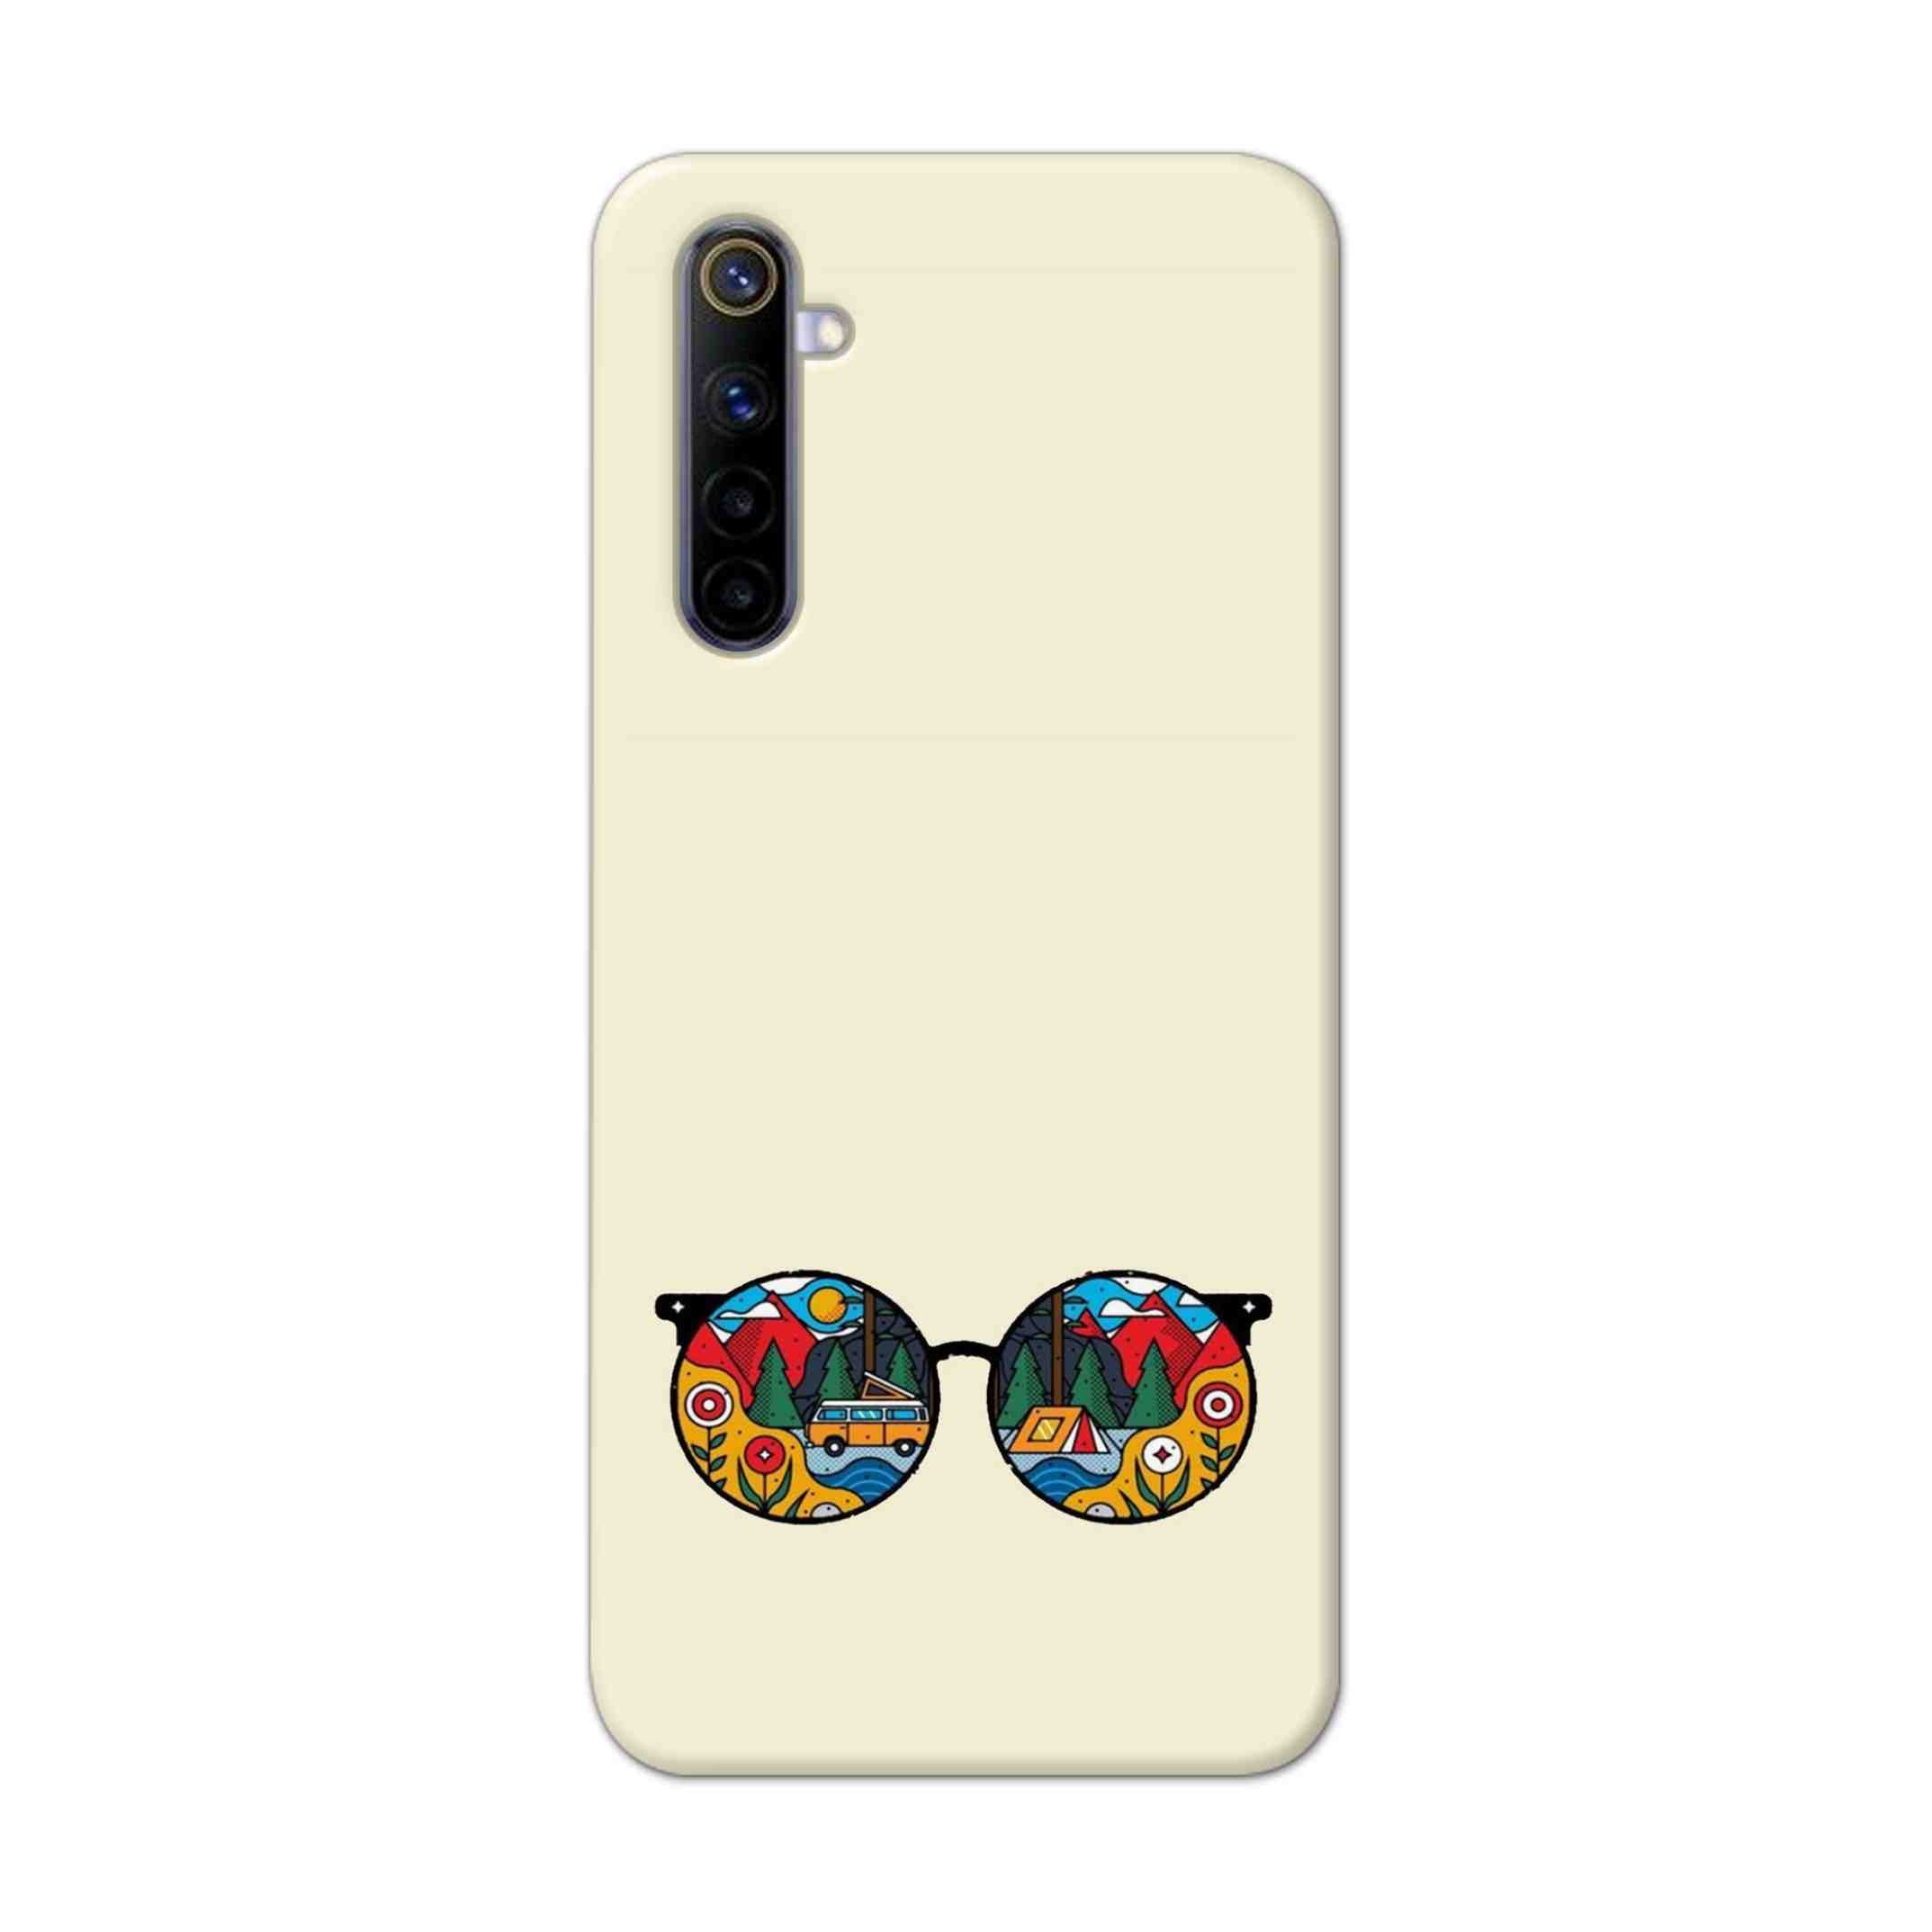 Buy Rainbow Sunglasses Hard Back Mobile Phone Case Cover For REALME 6 PRO Online